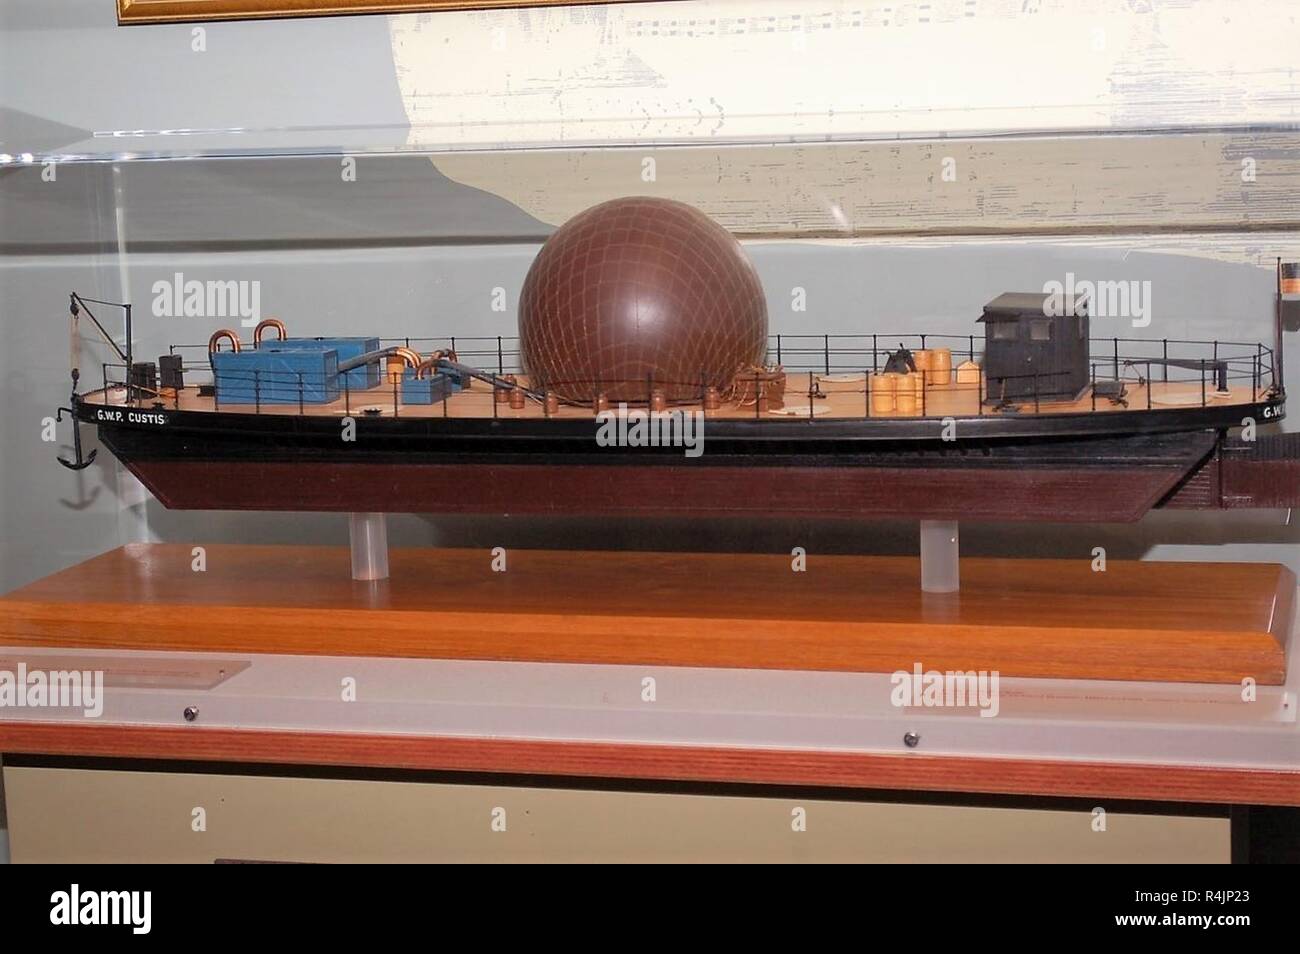 The Hampton Roads Naval Museum contains a detailed model of the USS G.W. Parke Custis. The balloon boat was used by Union forces for the first time on November 11, 1861, when Thaddeus Lowe conducted an aerial observation of Confederate positions from the vessel. This observation paved the way for the US Navy’s present use of air and an element of sea power. The model in the museum’s gallery was built by Floyd Hudson, and was presented to the Truxton-Decatur Museum in 1961. The model was eventually presented to the museum Stock Photo